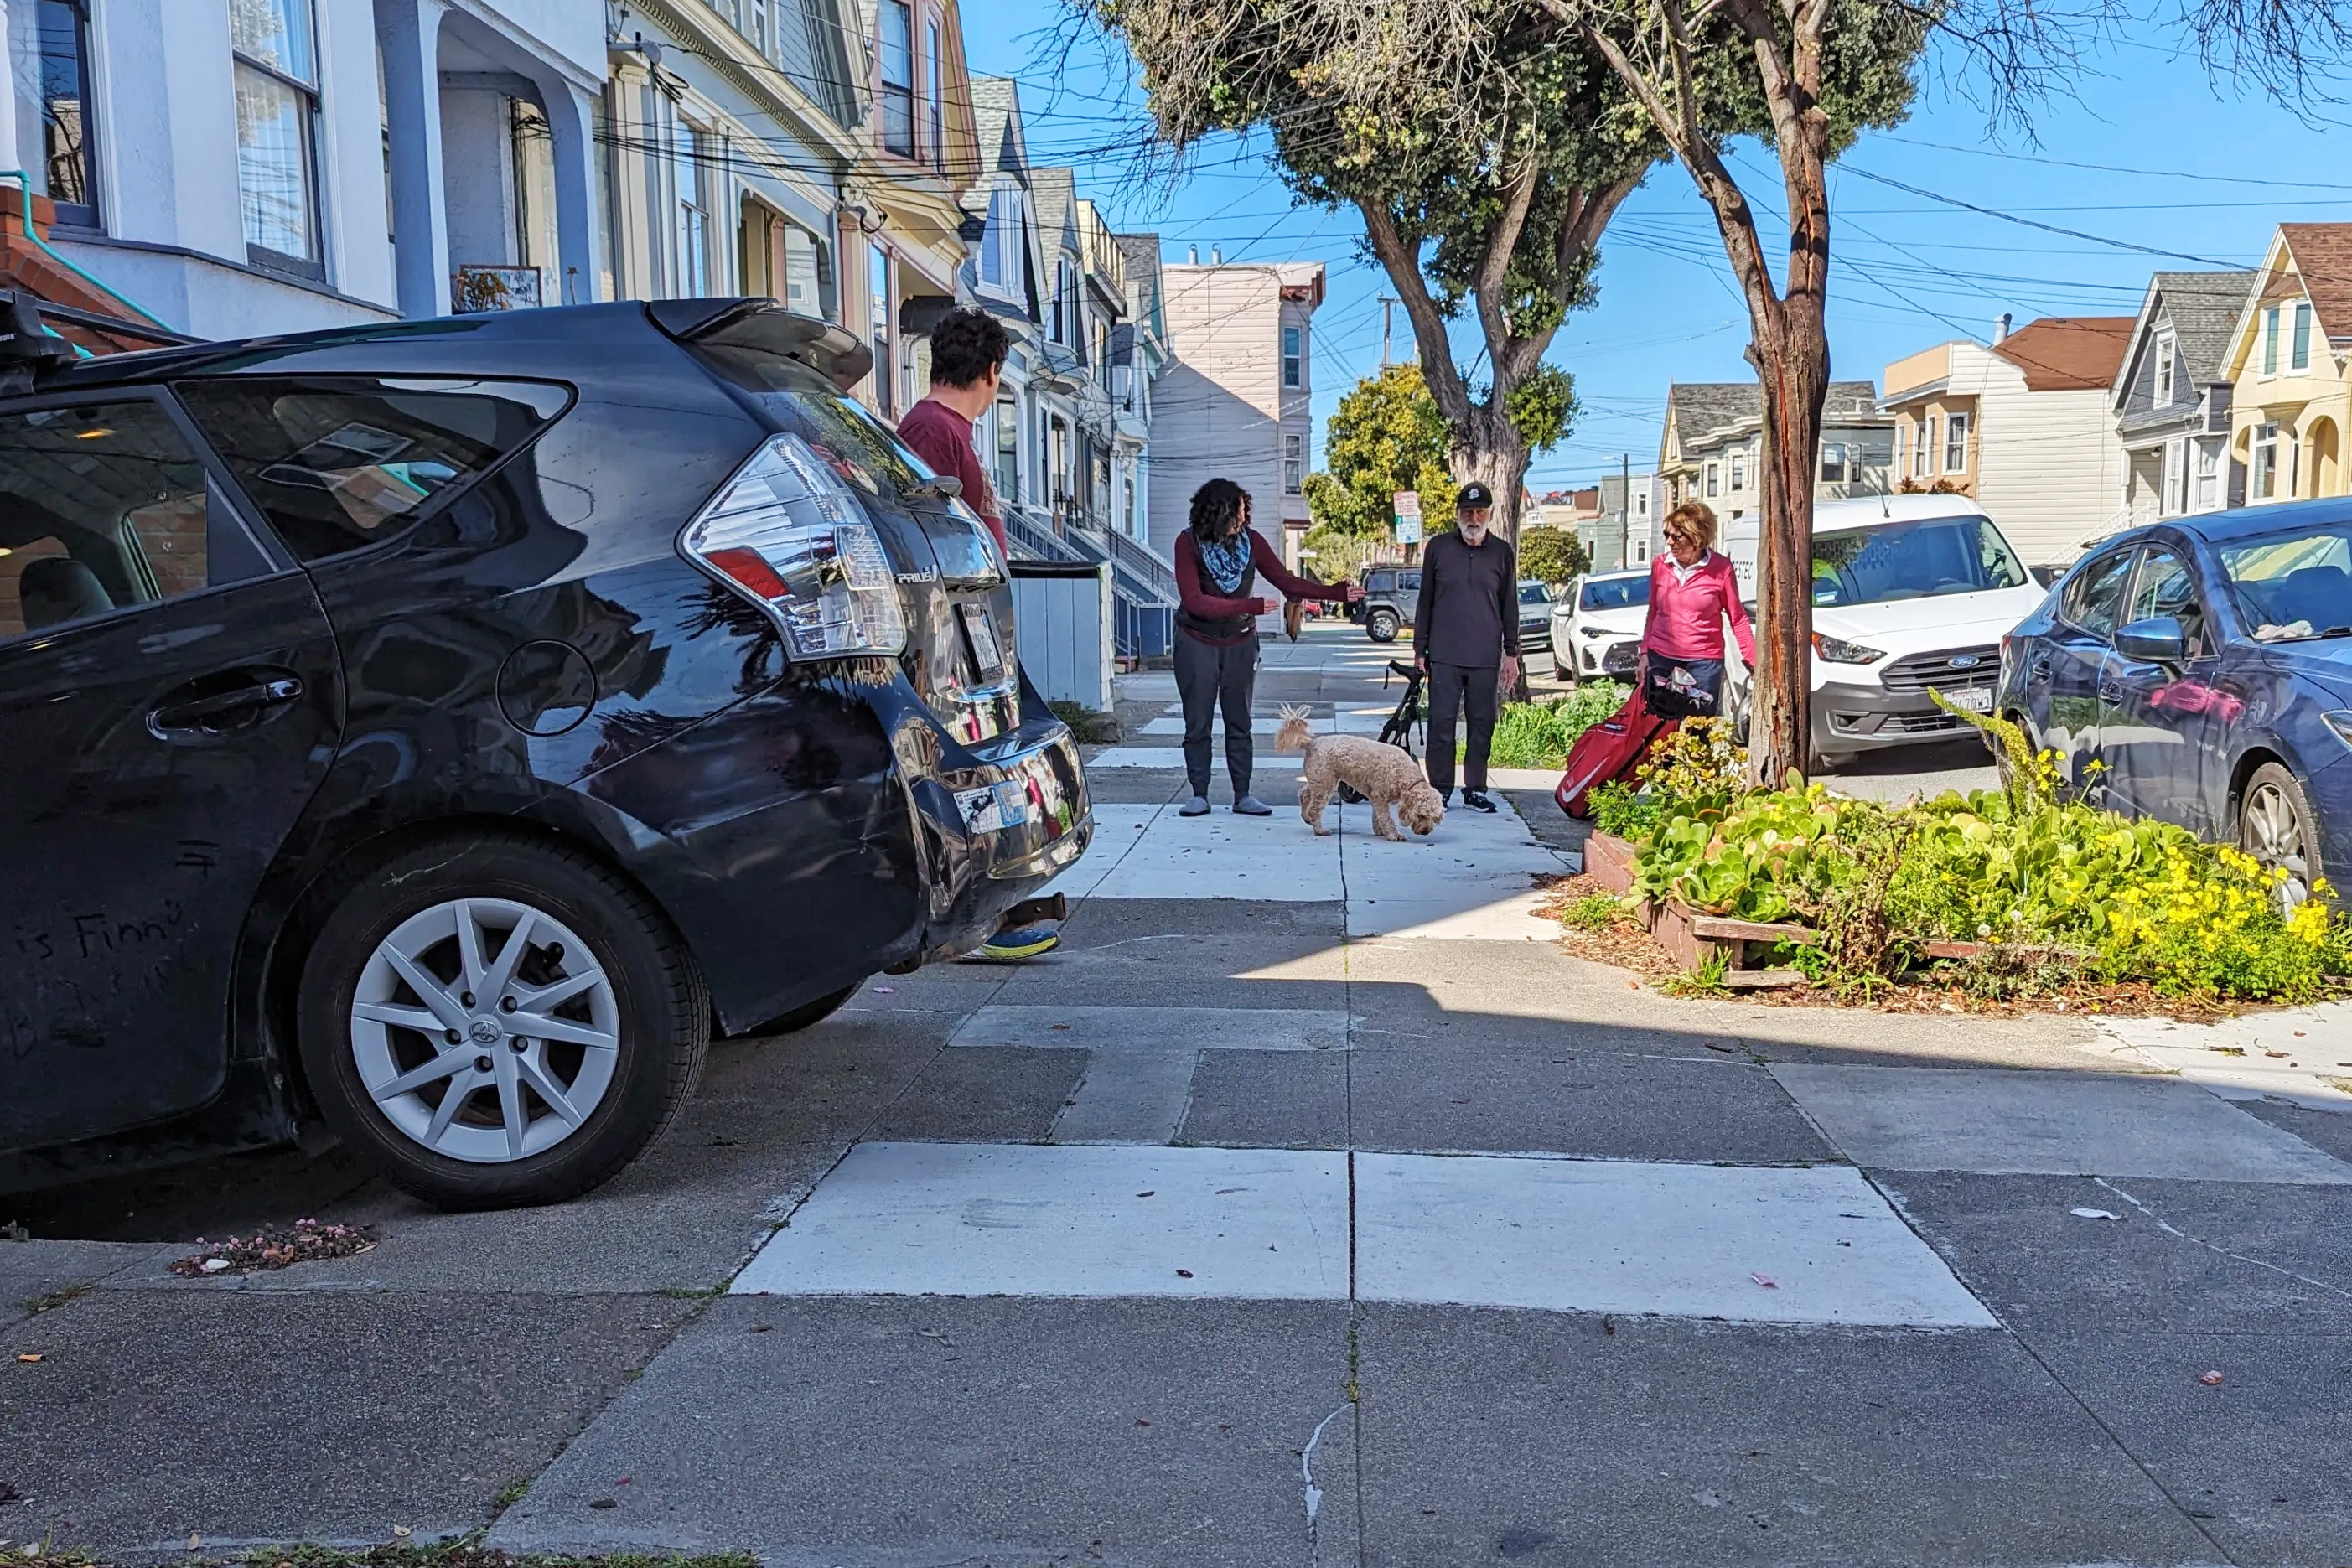 A sunny street scene with parked cars, three people, and a dog walking on the sidewalk, surrounded by houses with greenery.